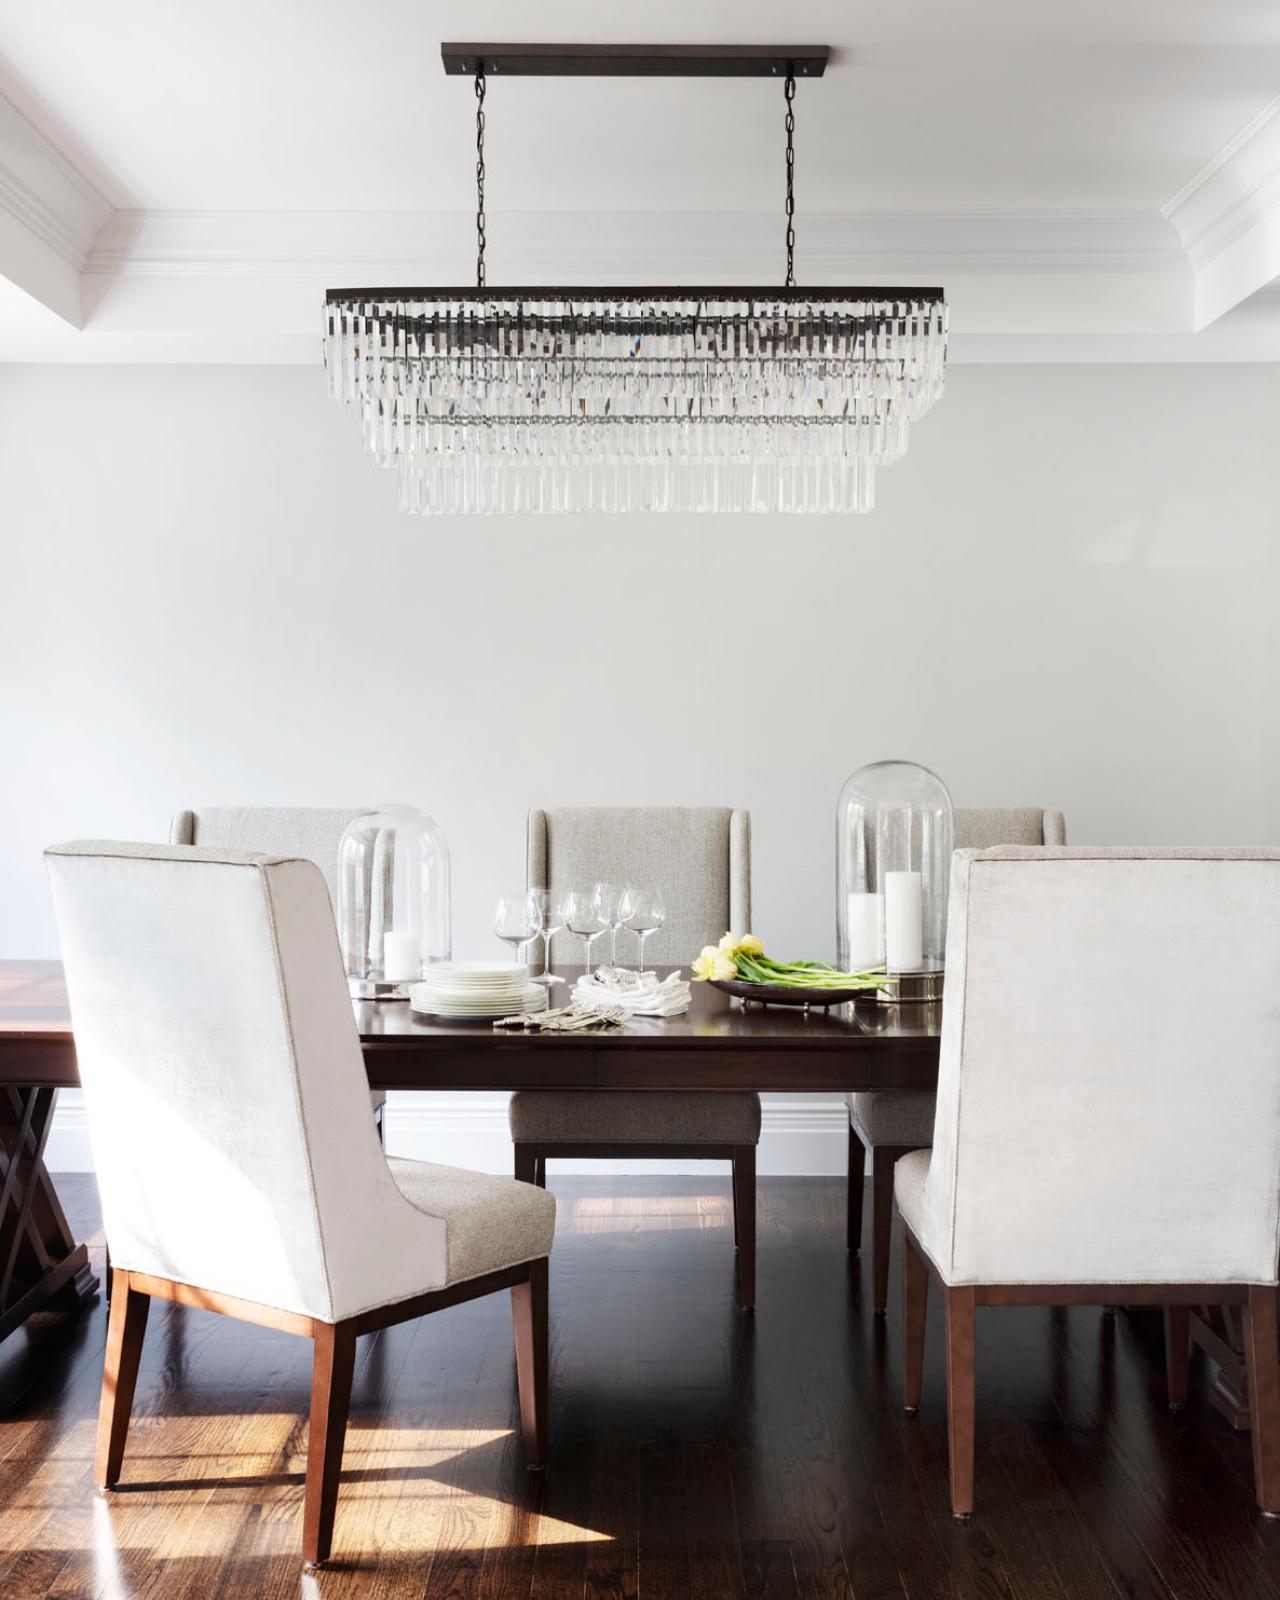 How To Choose Dining Room Lighting, Pictures Of Light Fixtures Over Dining Room Tables And Chairs